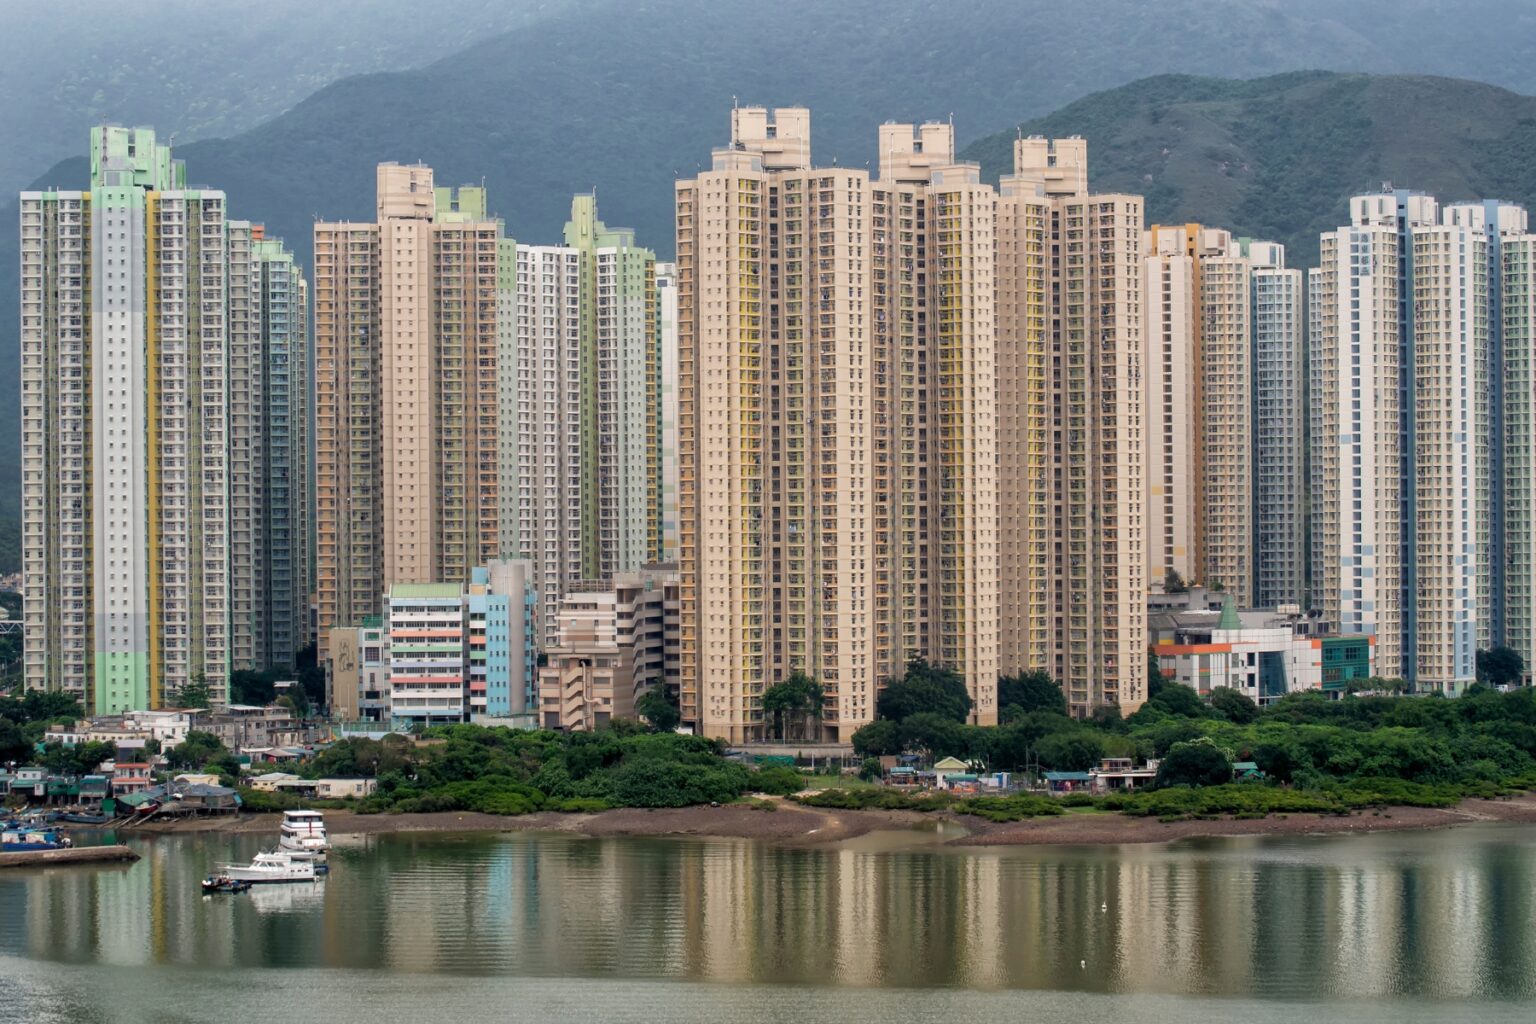 a view of a block of apartments in hong kong